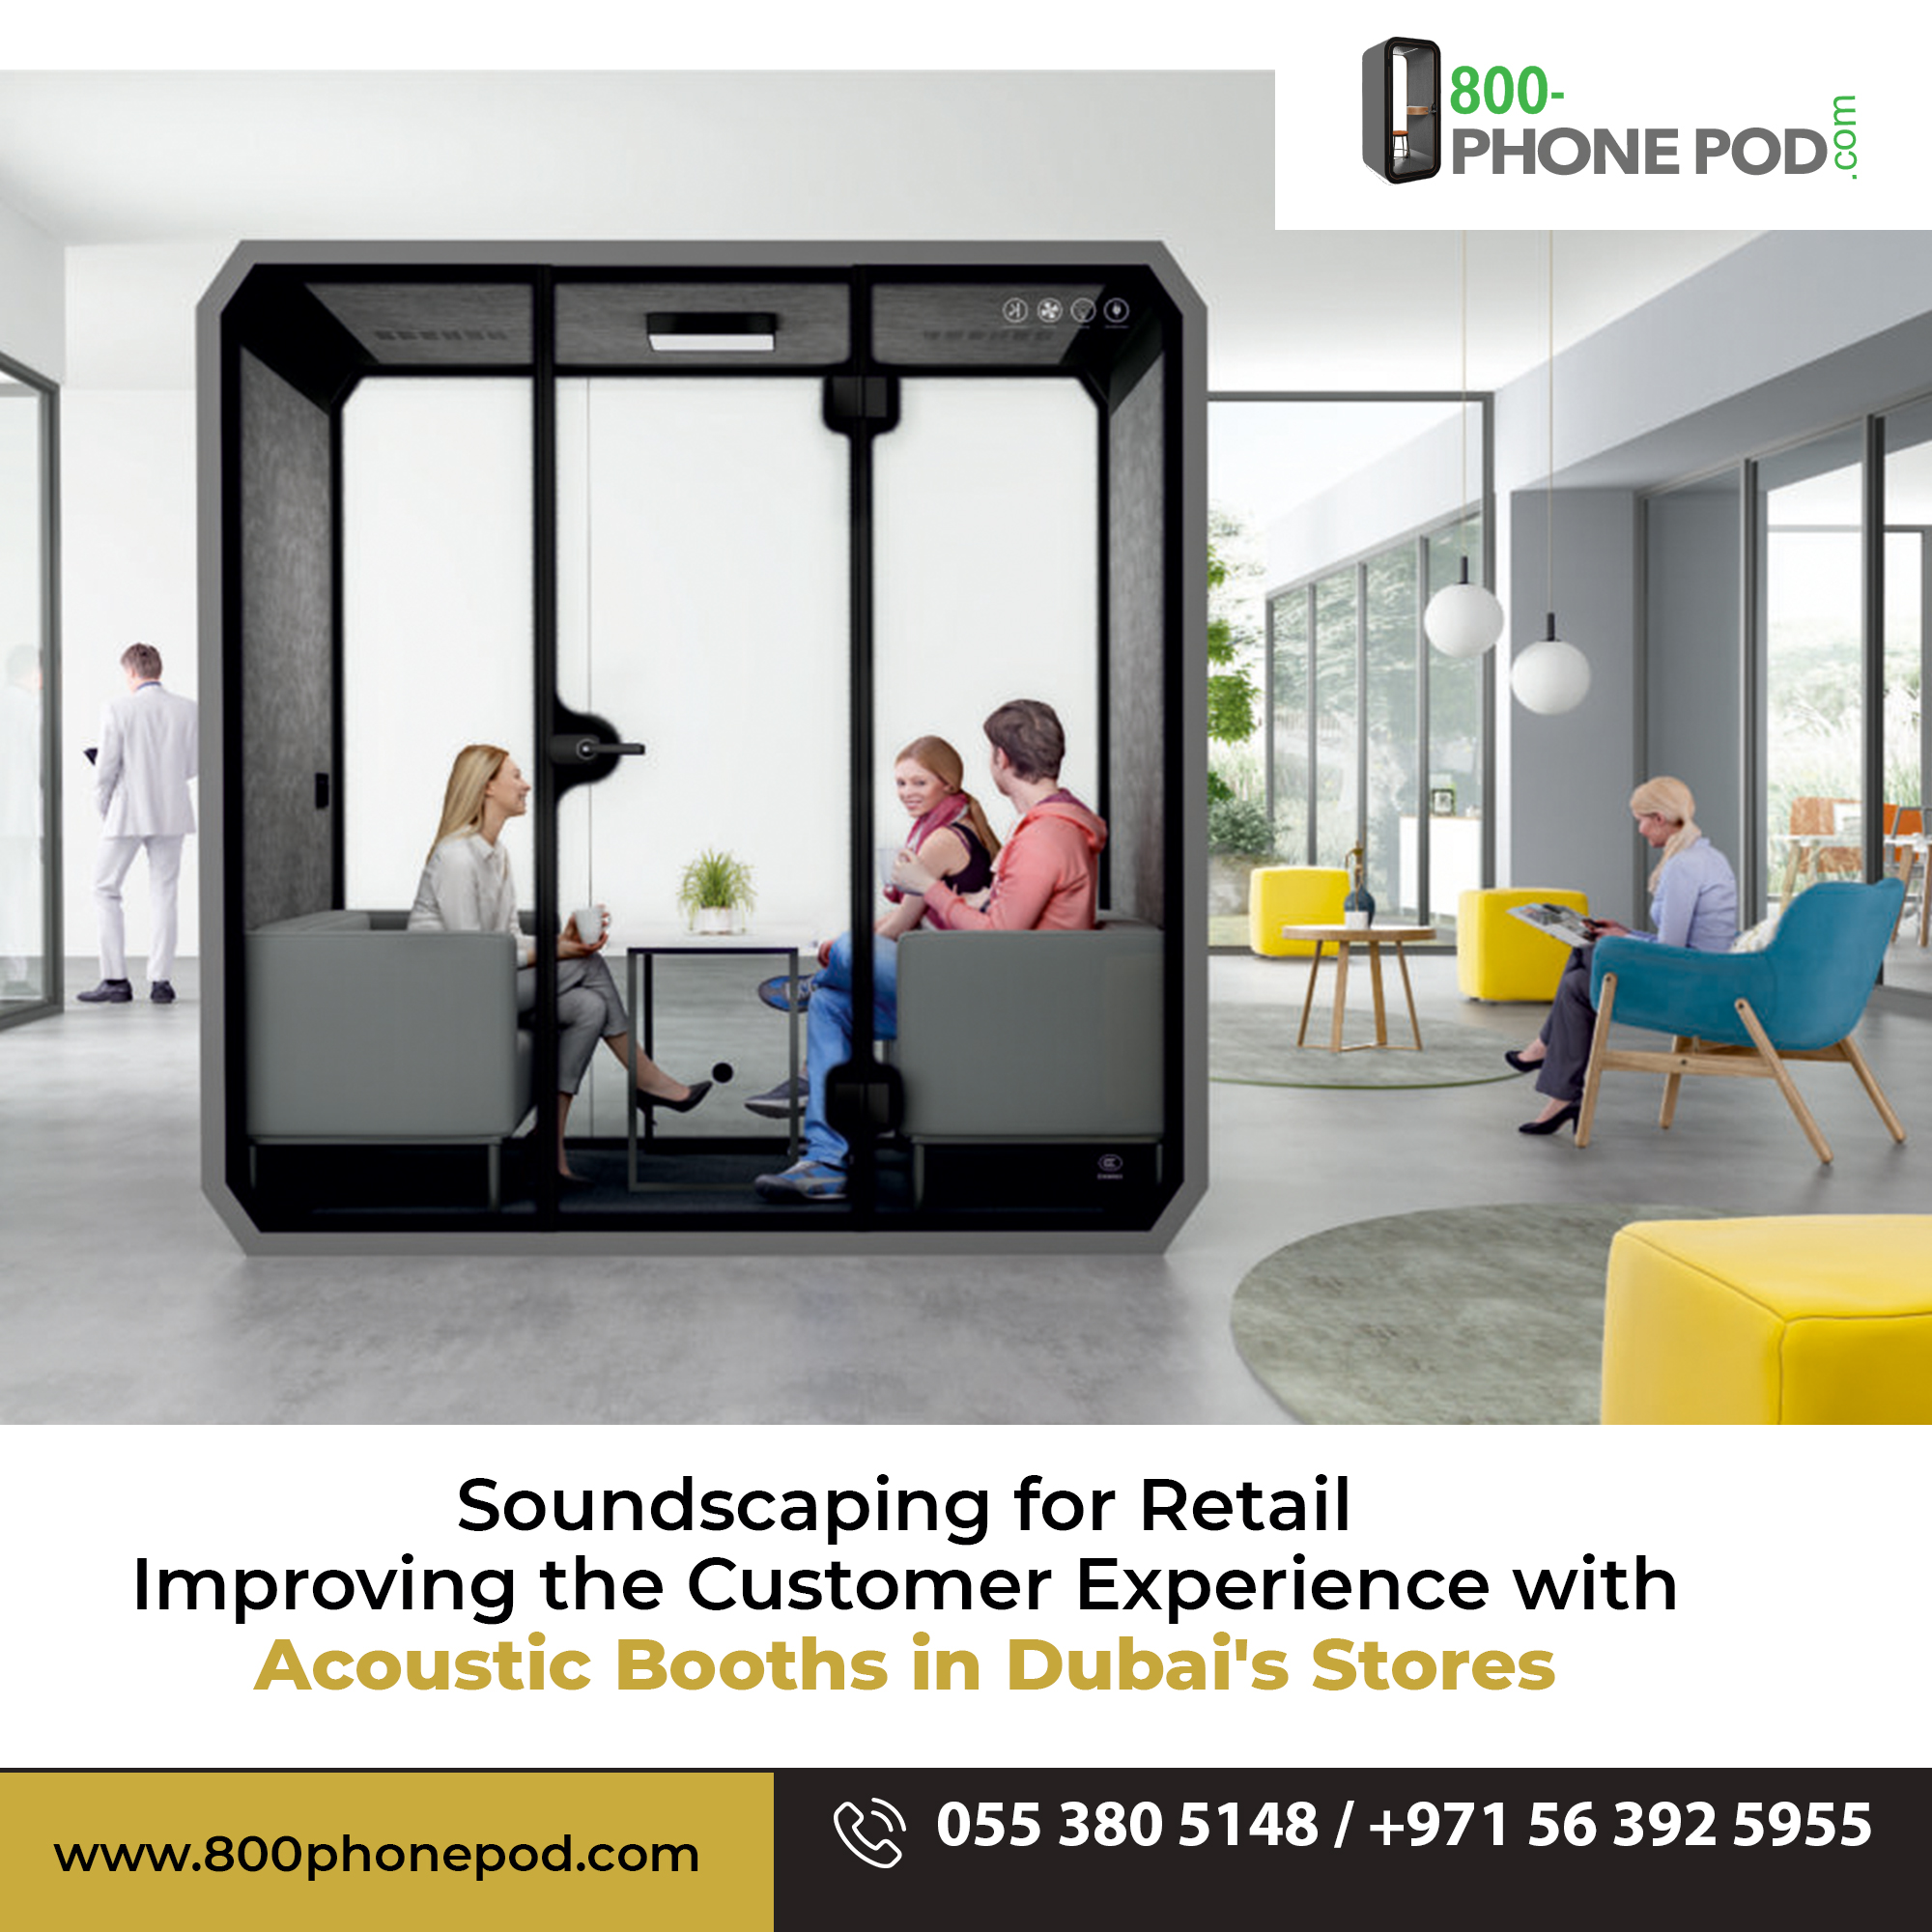 Soundscaping for Retail: Improve Customer Experience with Acoustic Booths